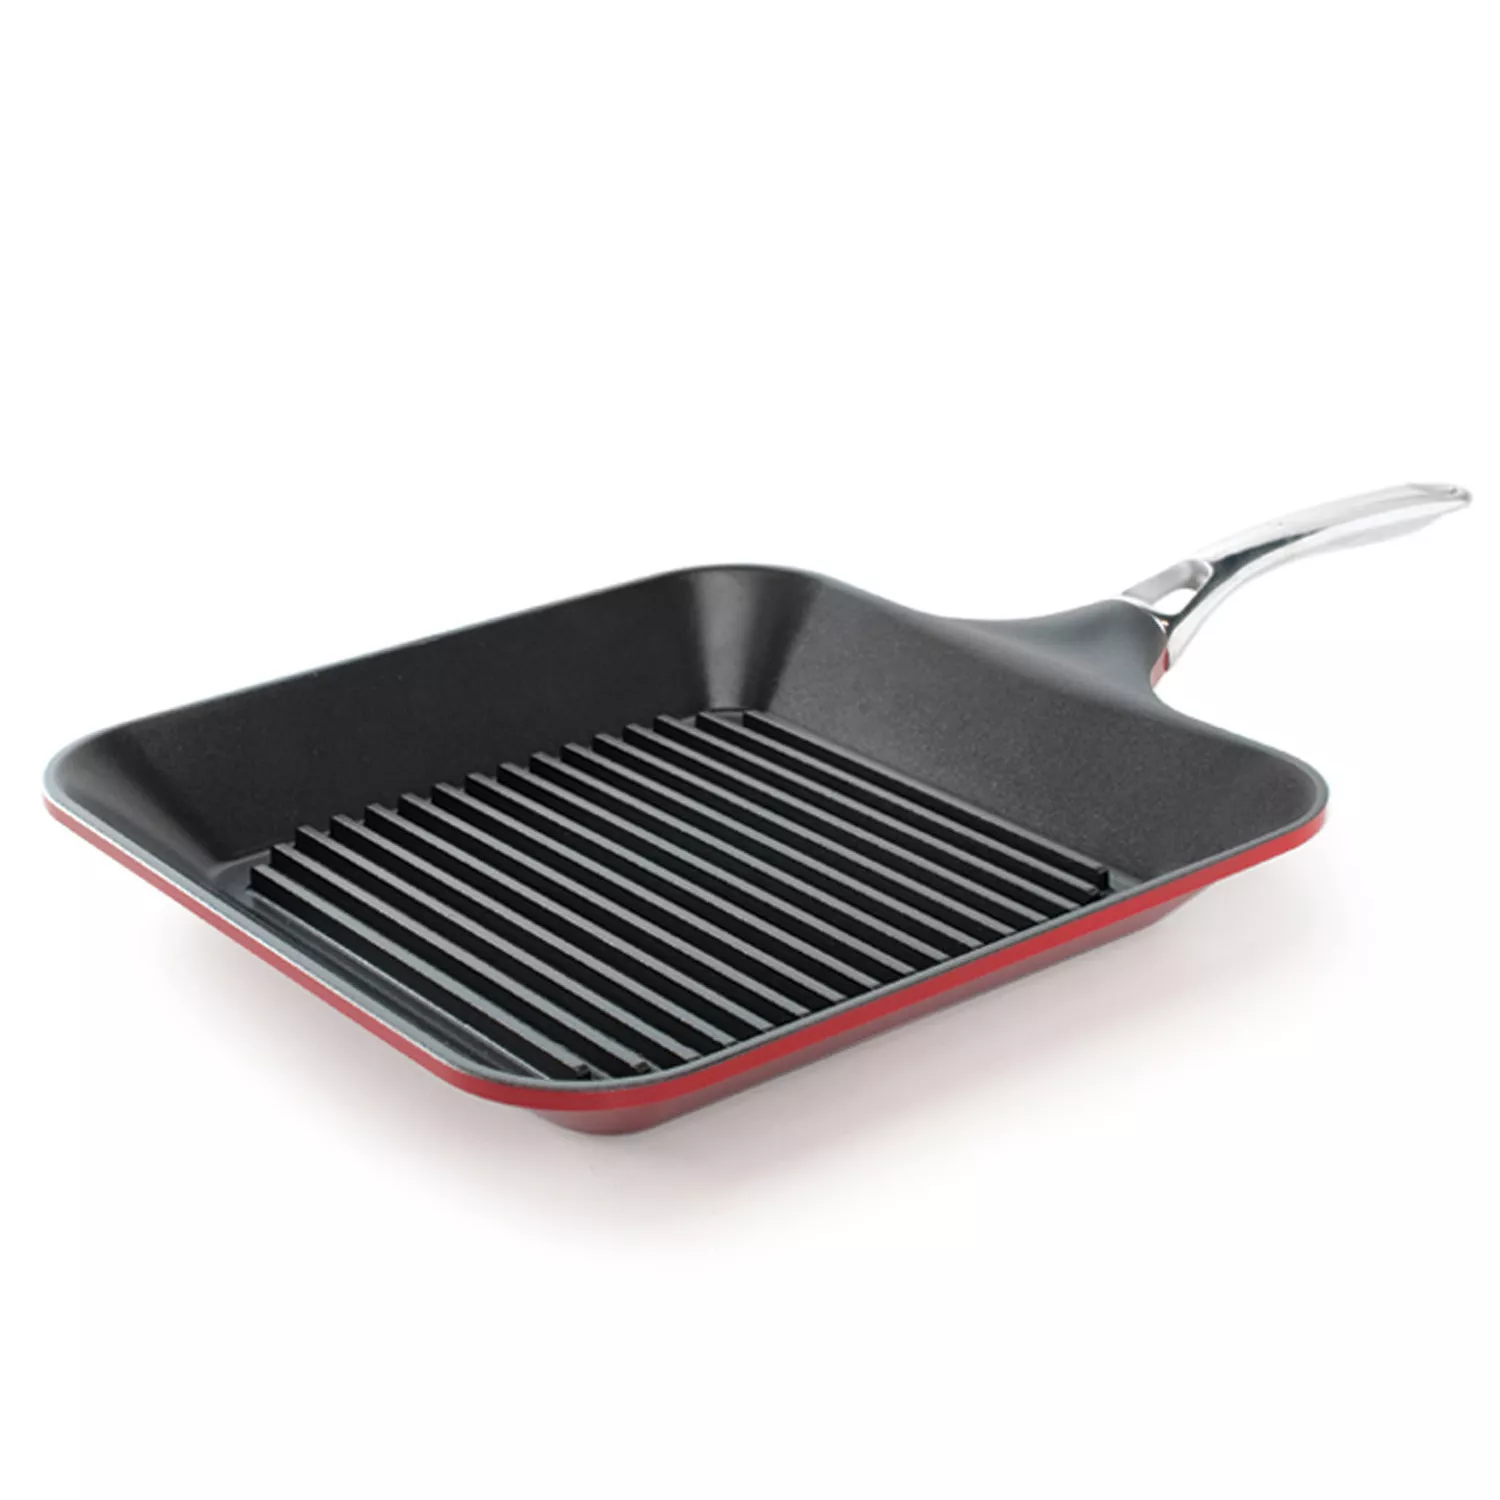 Nordic Ware Pro Cast Traditions 9 in. x 13 in. Rectangular Baker